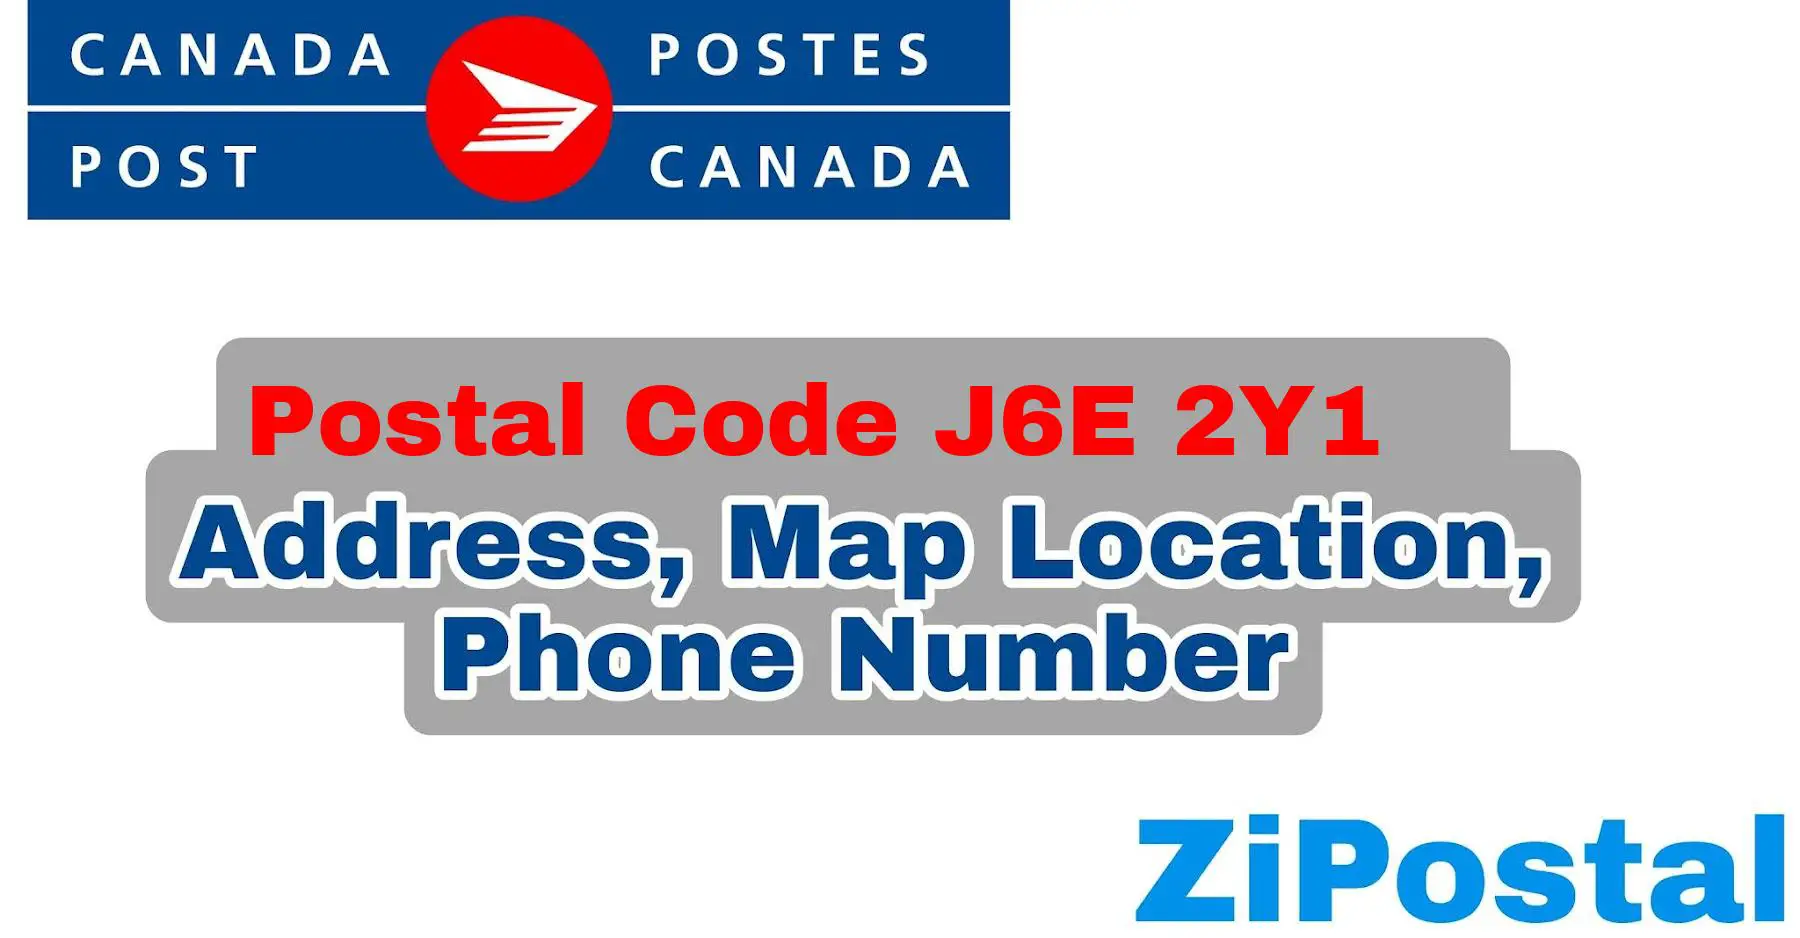 Postal Code J6E 2Y1 Address Map Location and Phone Number